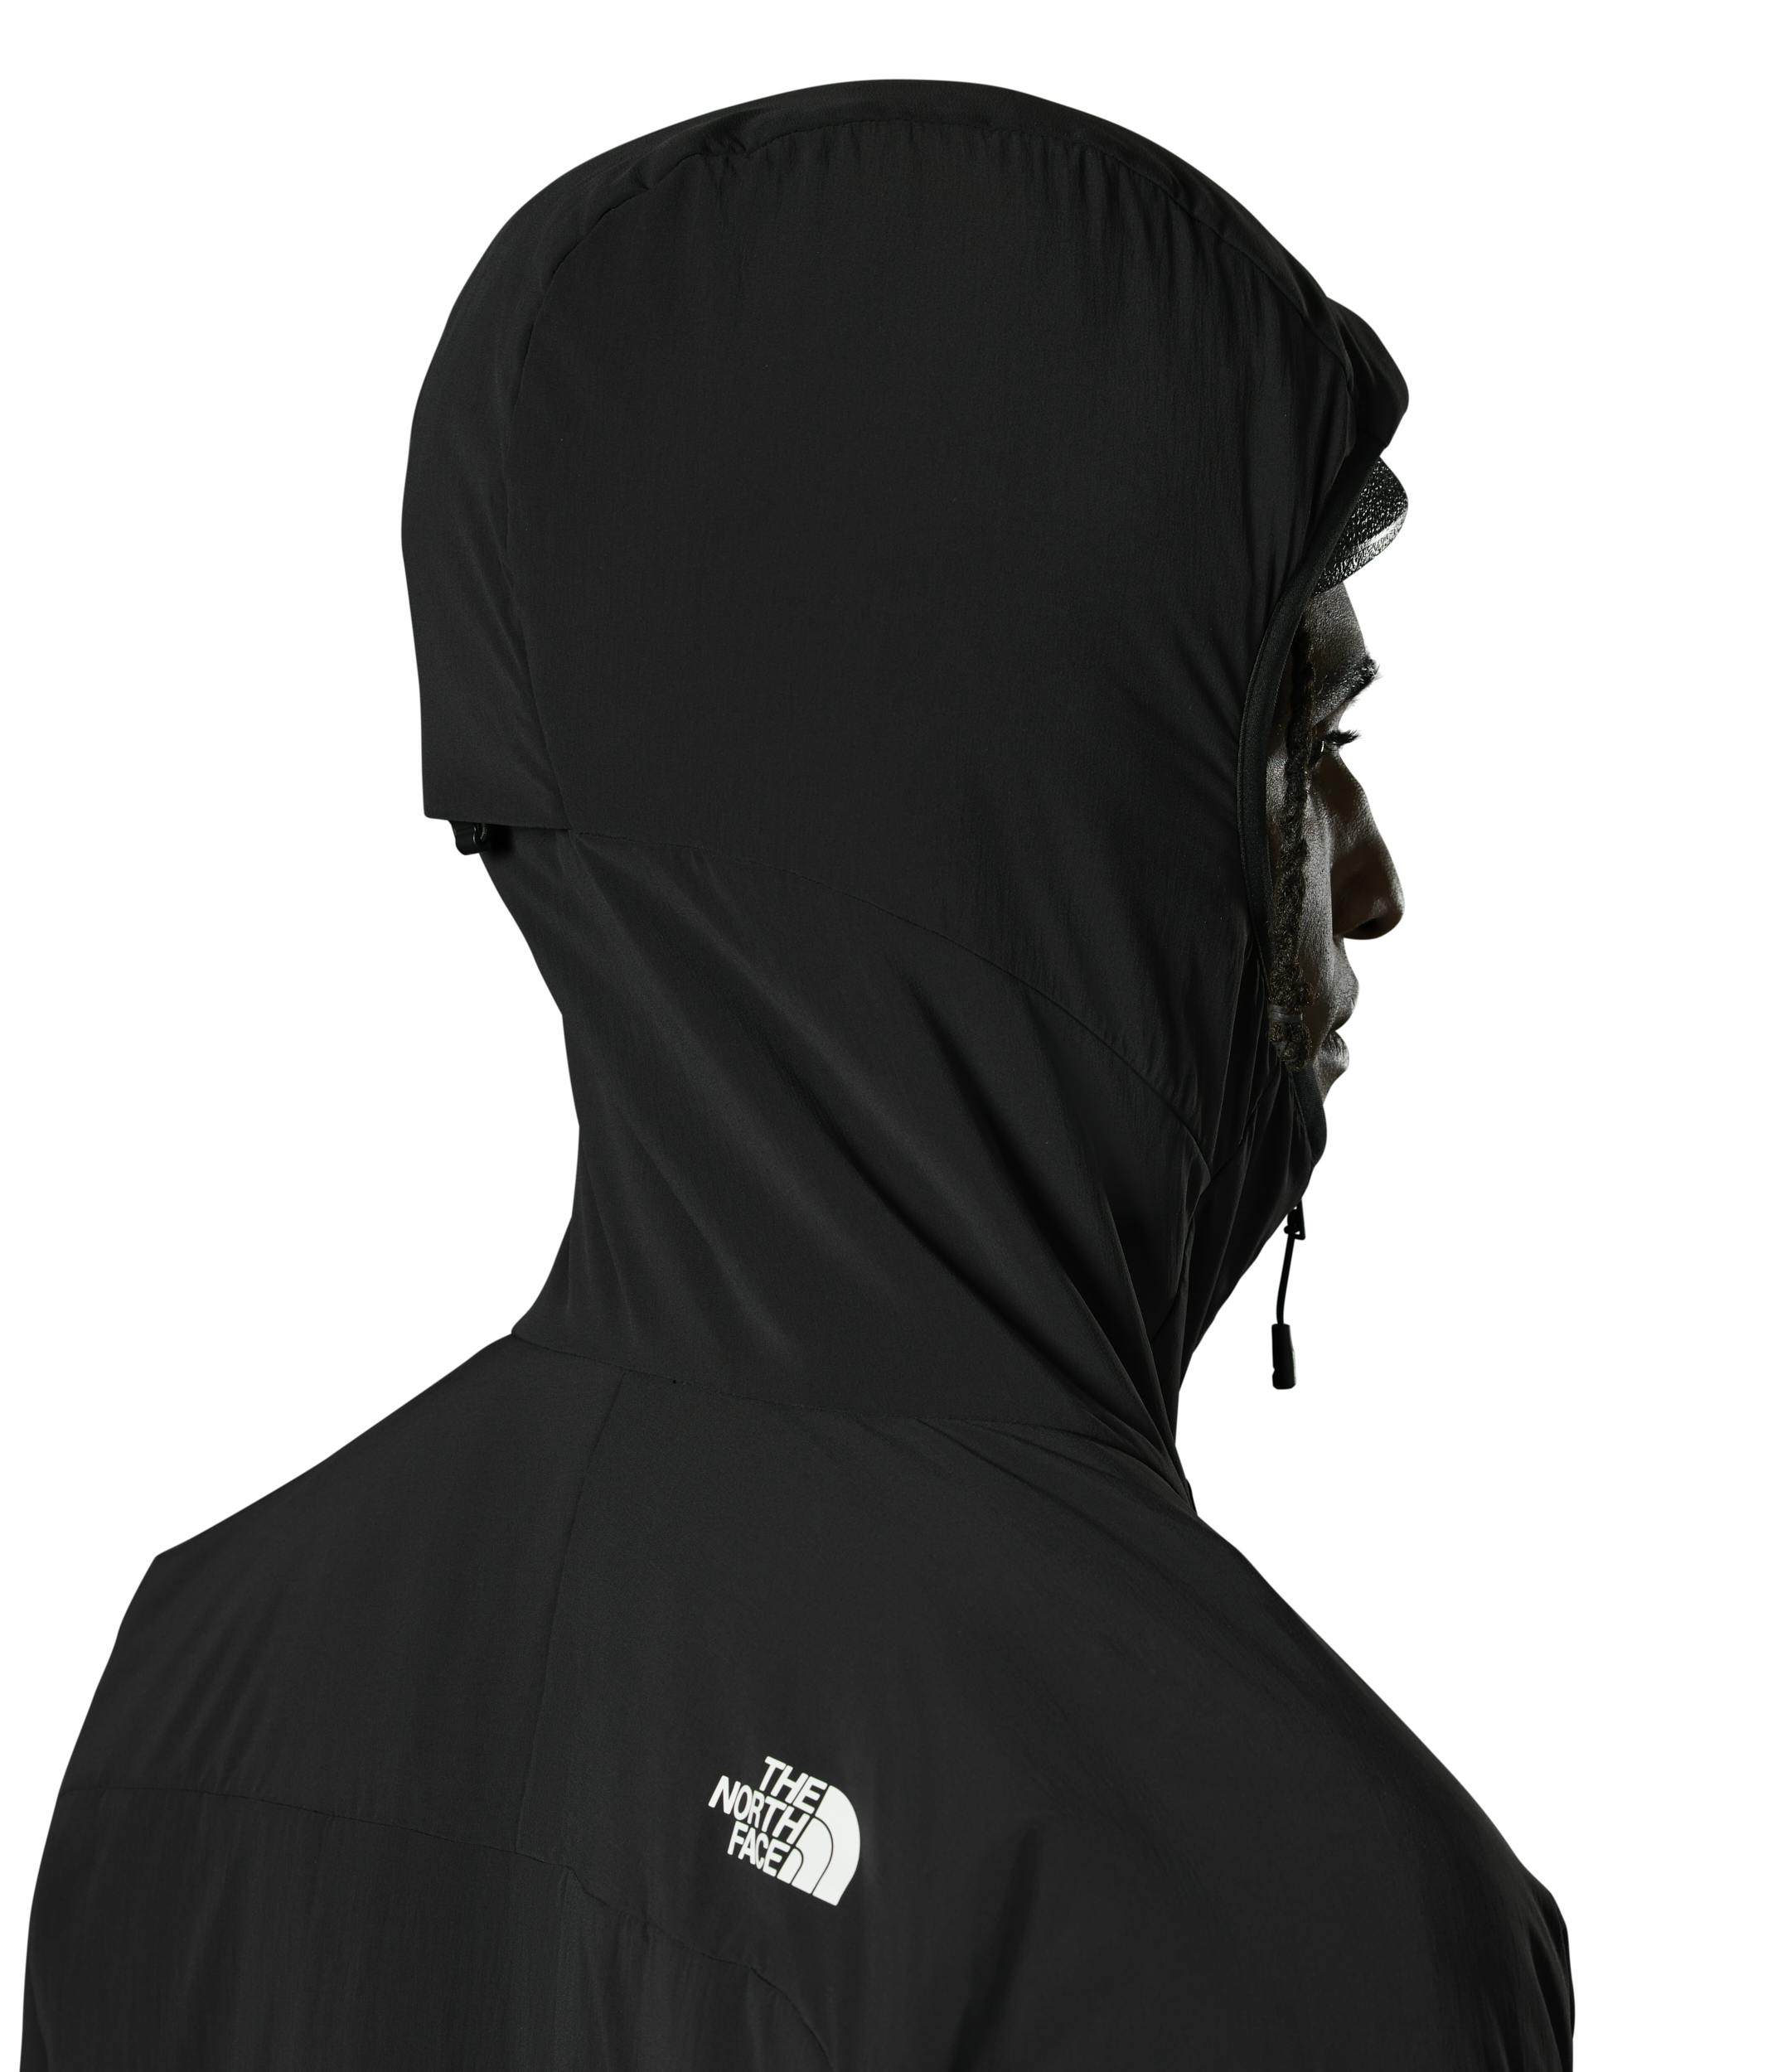 The North Face Men's Summit Casaval Hybrid Hoodie